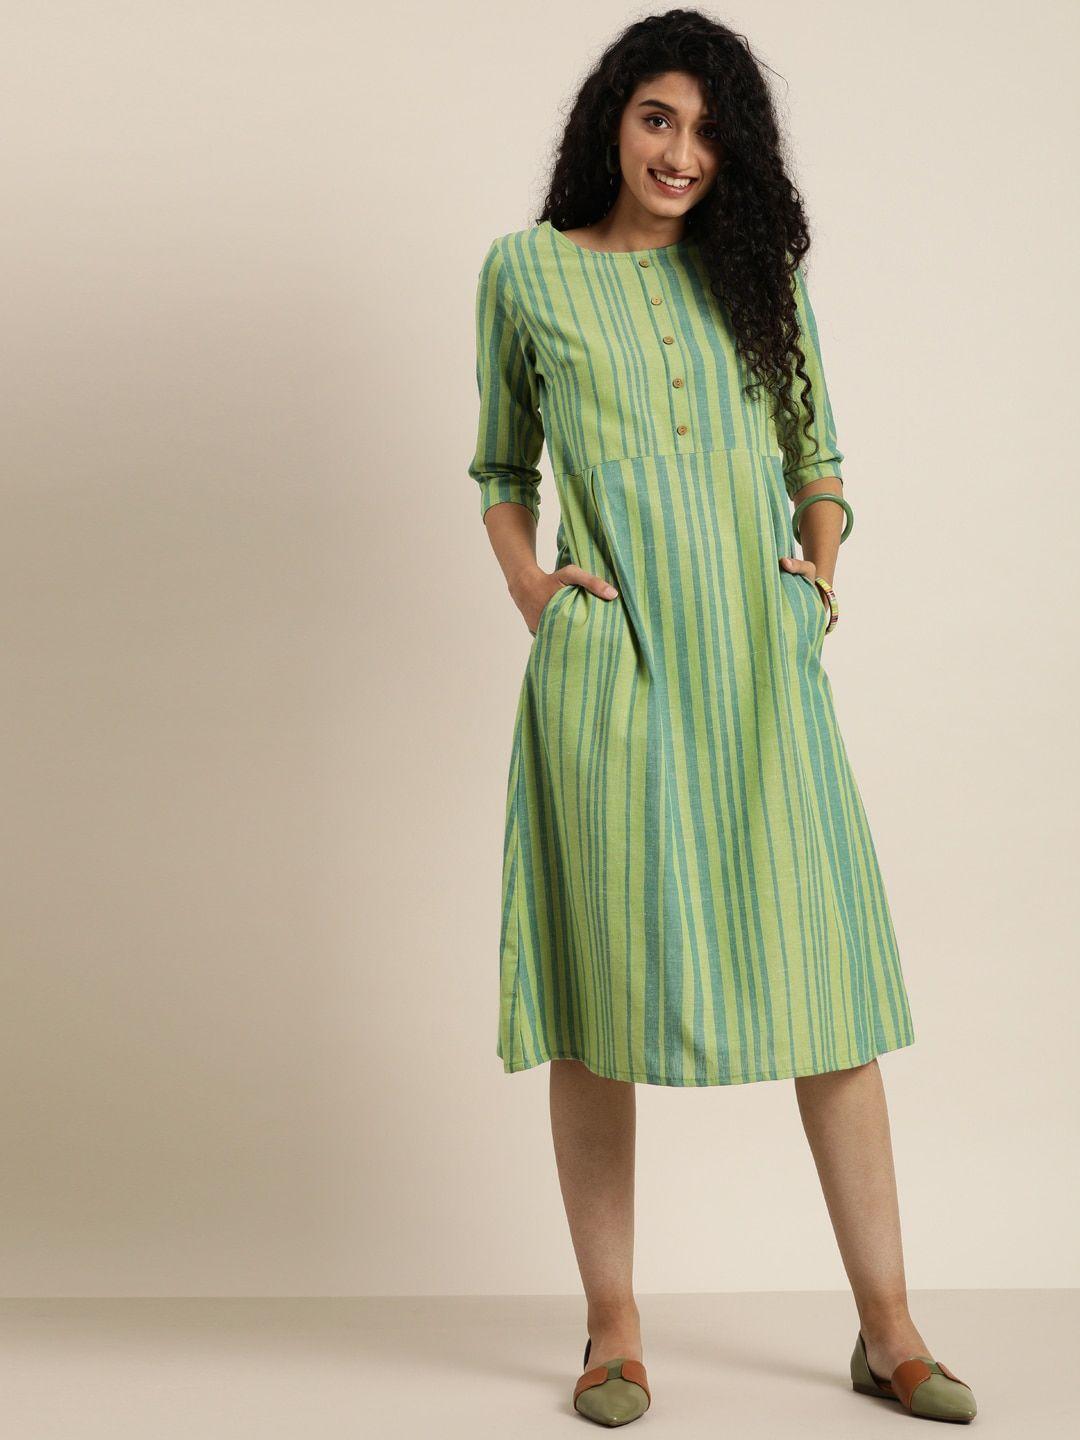 taavi women teal blue & green striped woven legacy a-line sustainable dress with pockets